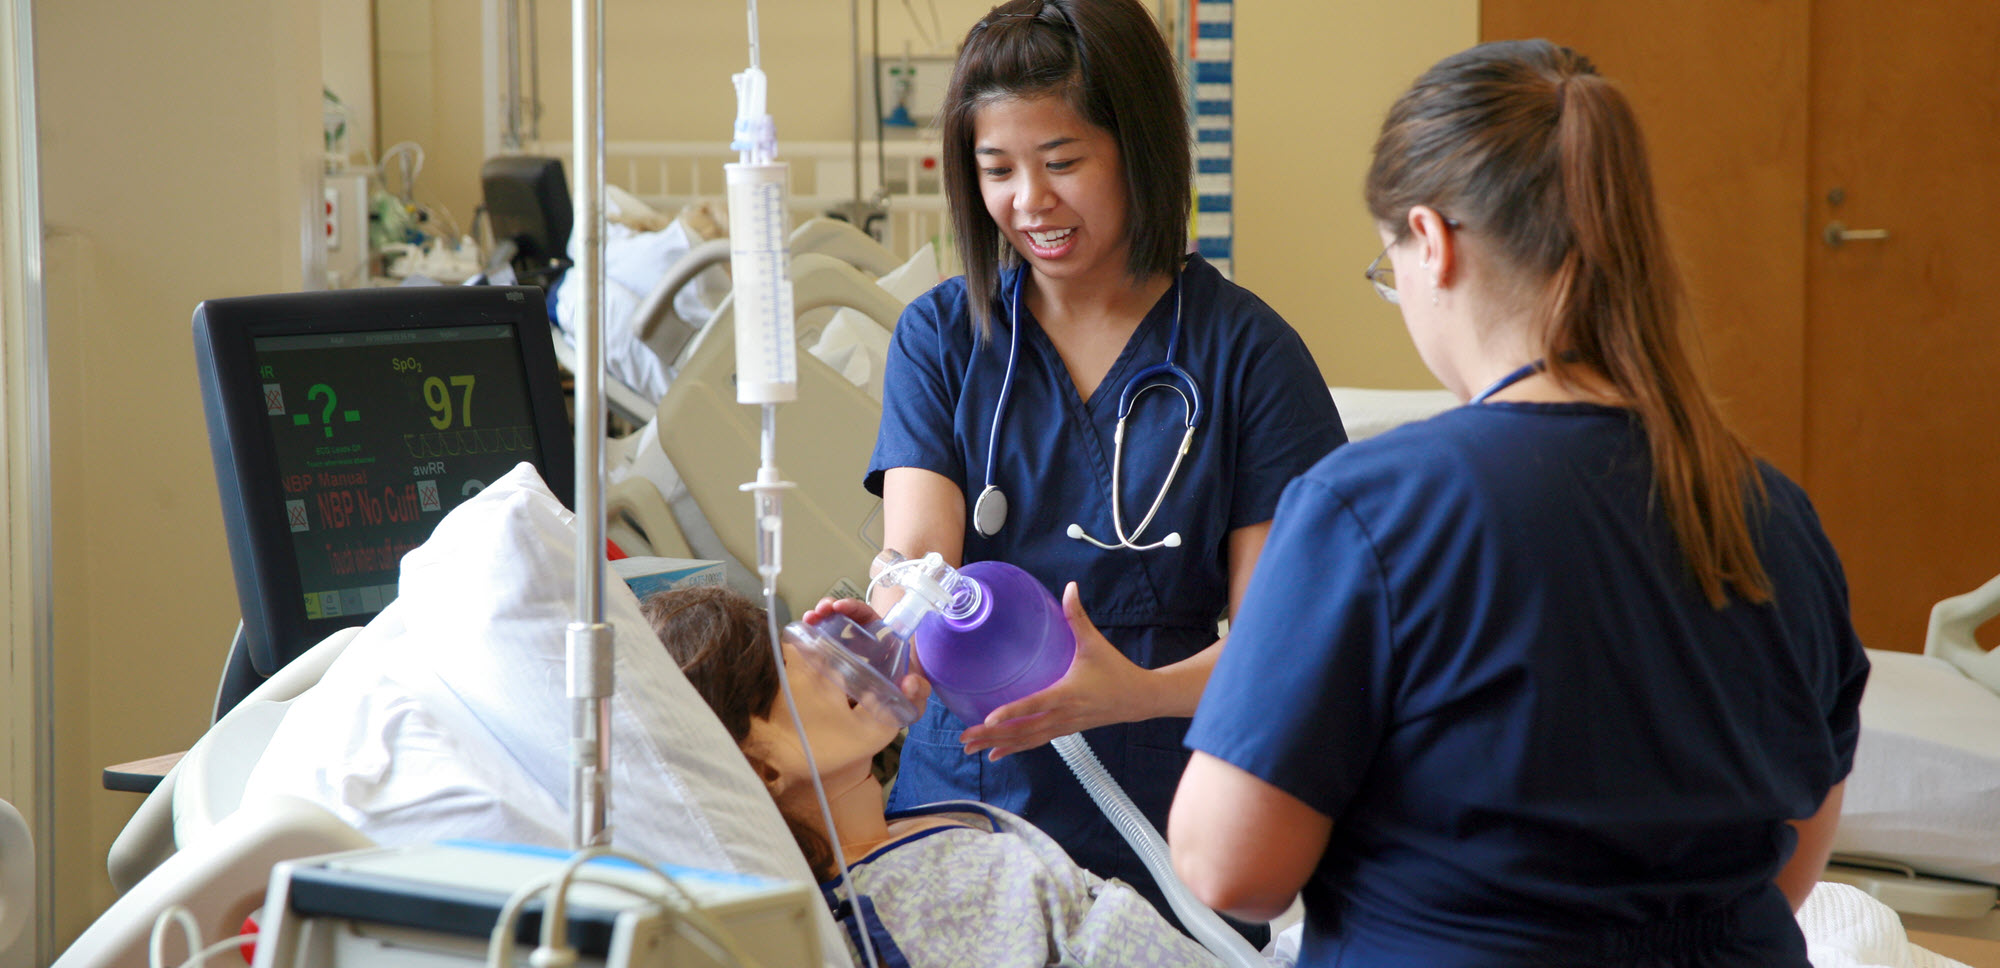 Nursing students participating in clinical simulation.